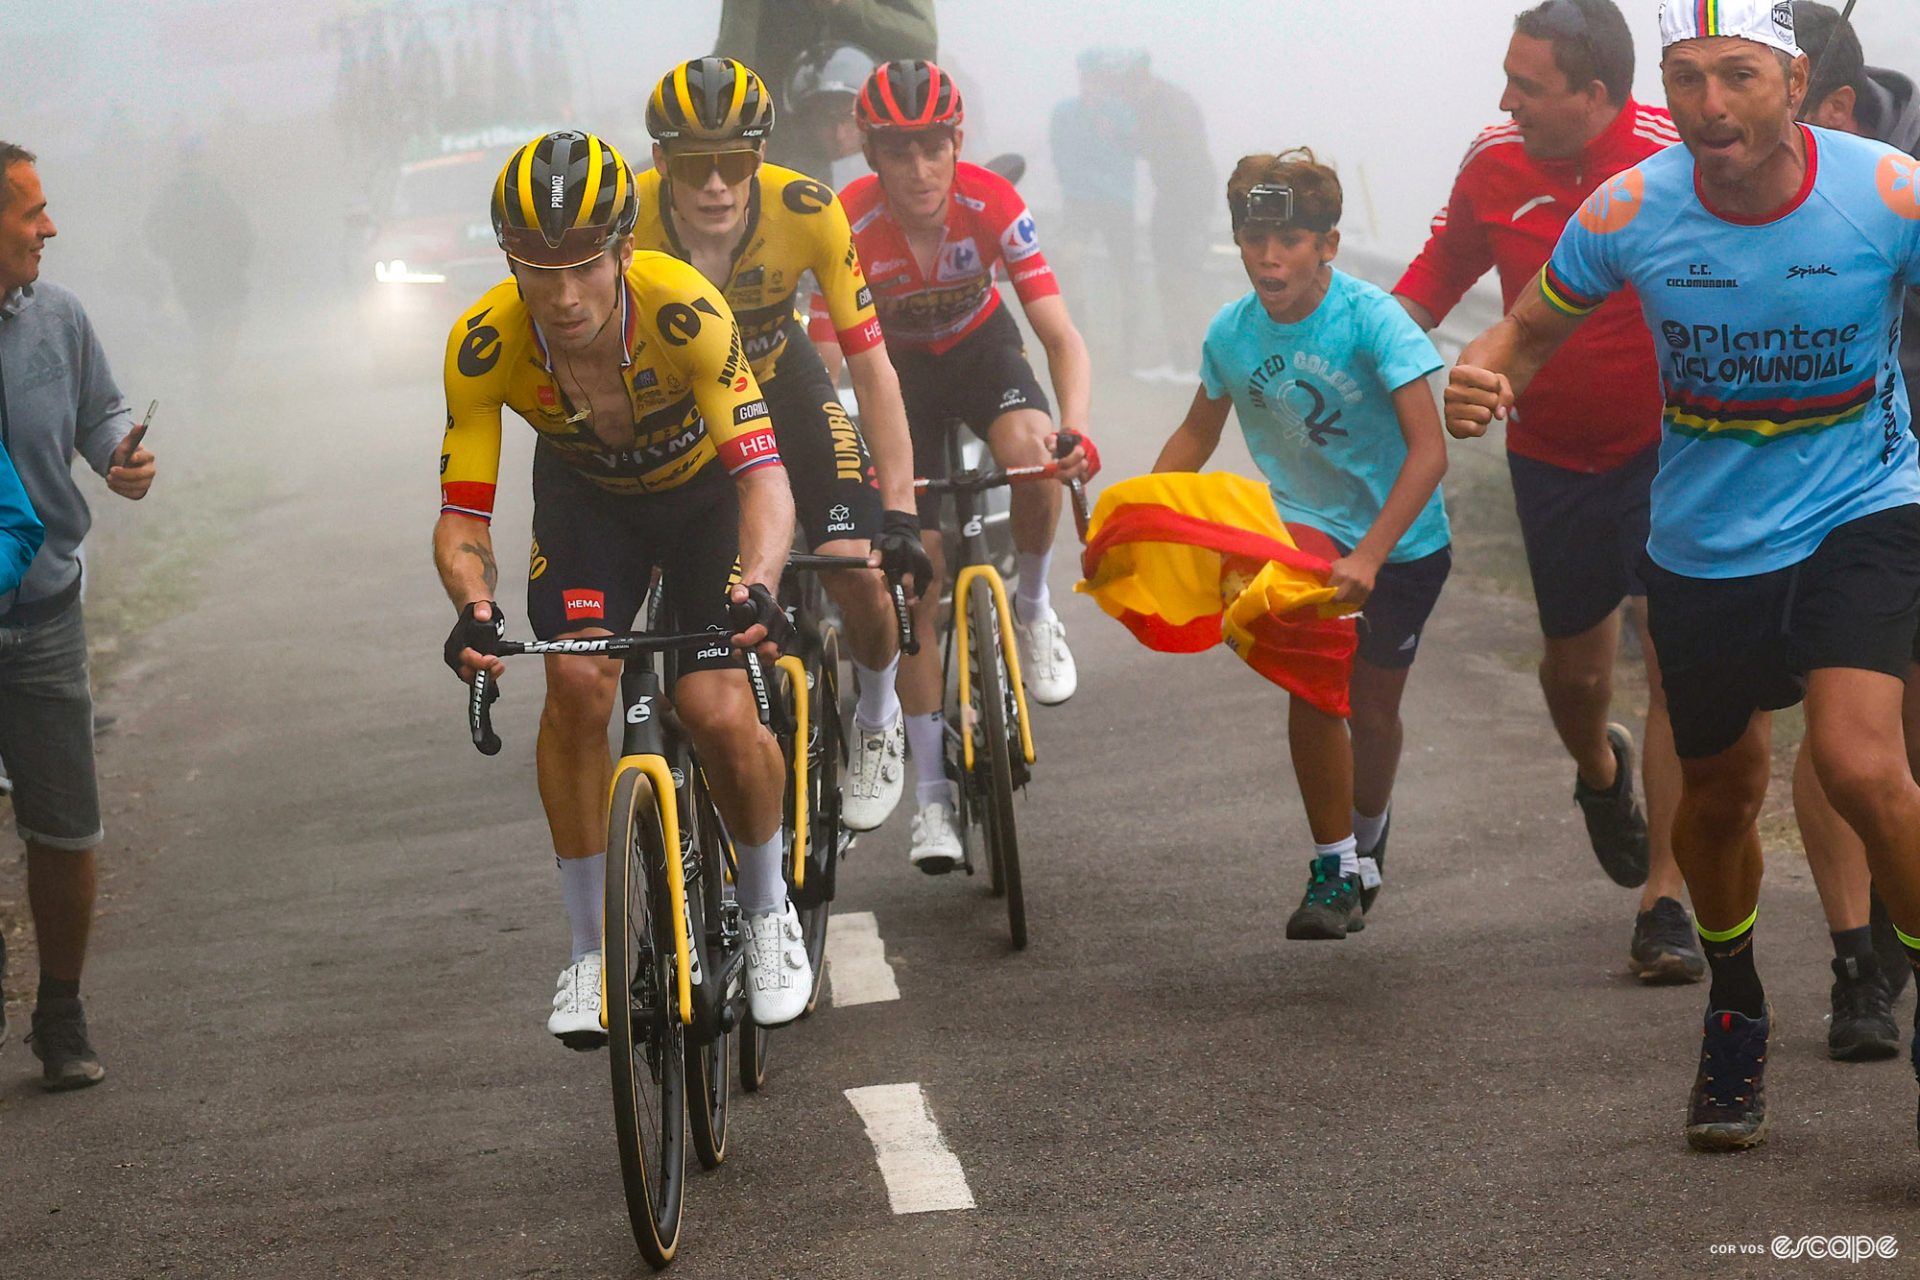 Primoz Roglic leads Jonas Vingegaard and Sepp Kuss, who is wearing the leader's red jersey, up the Angliru climb in foggy conditions.